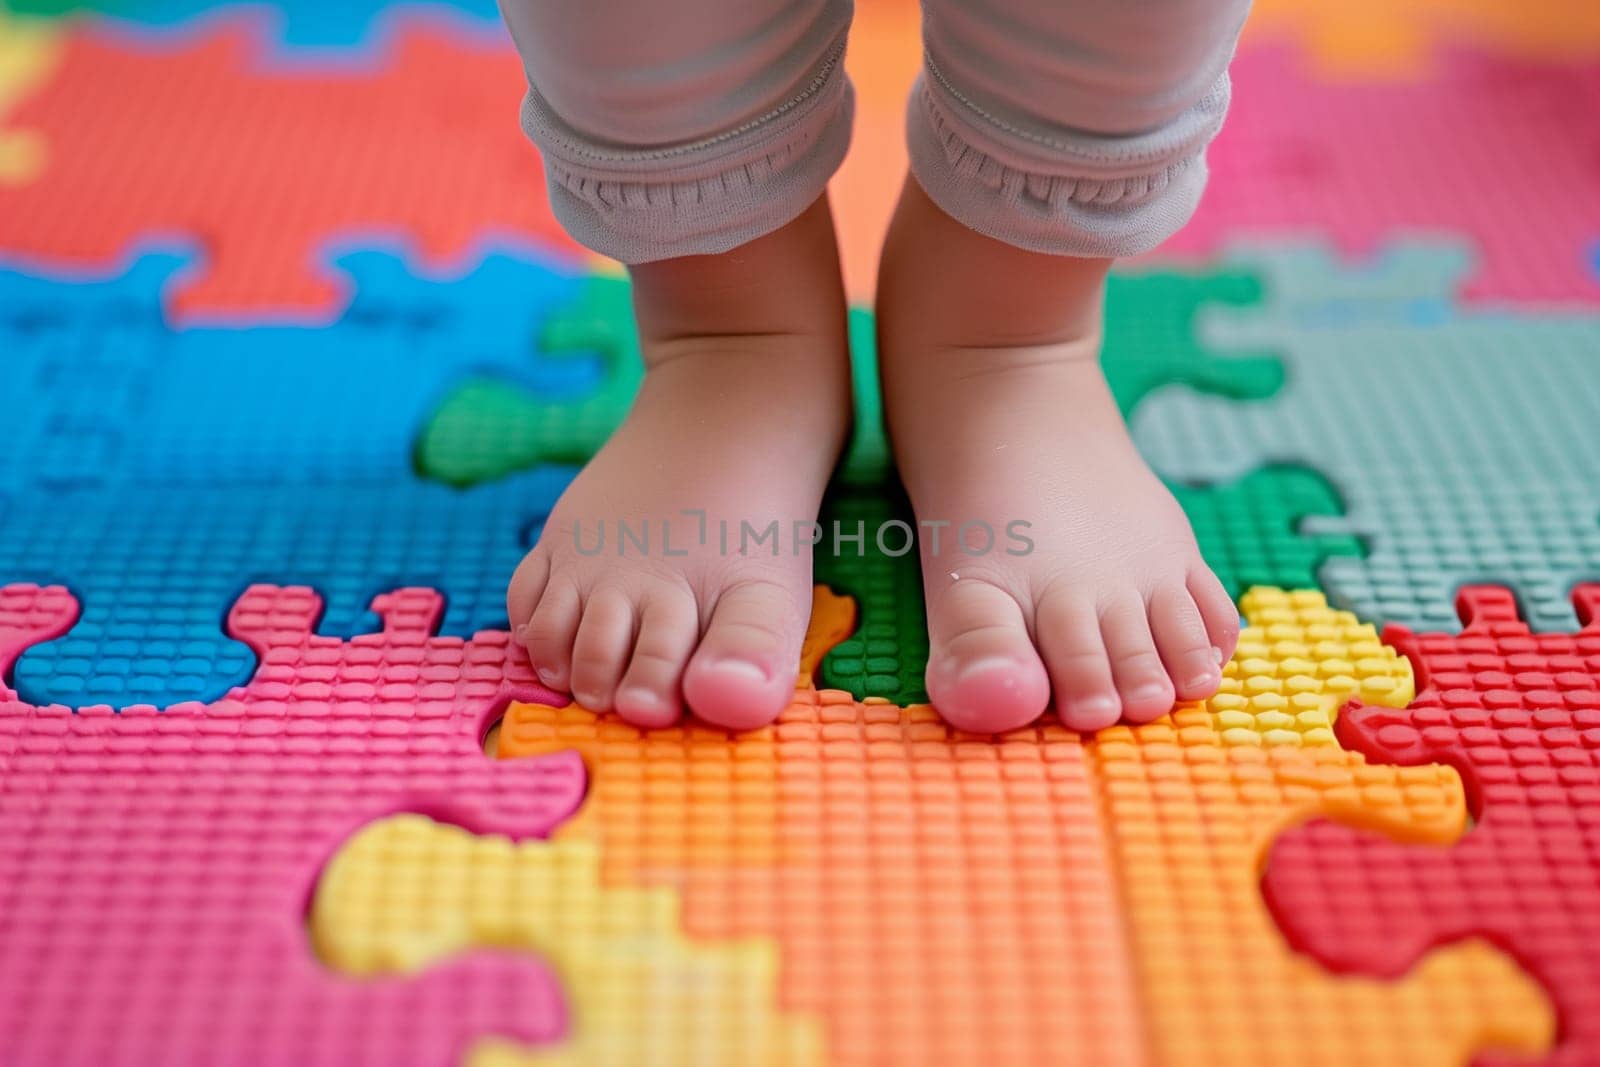 A childs bare feet standing on a vibrant and colorful jigsaw puzzle, with various puzzle pieces in different shapes and colors.